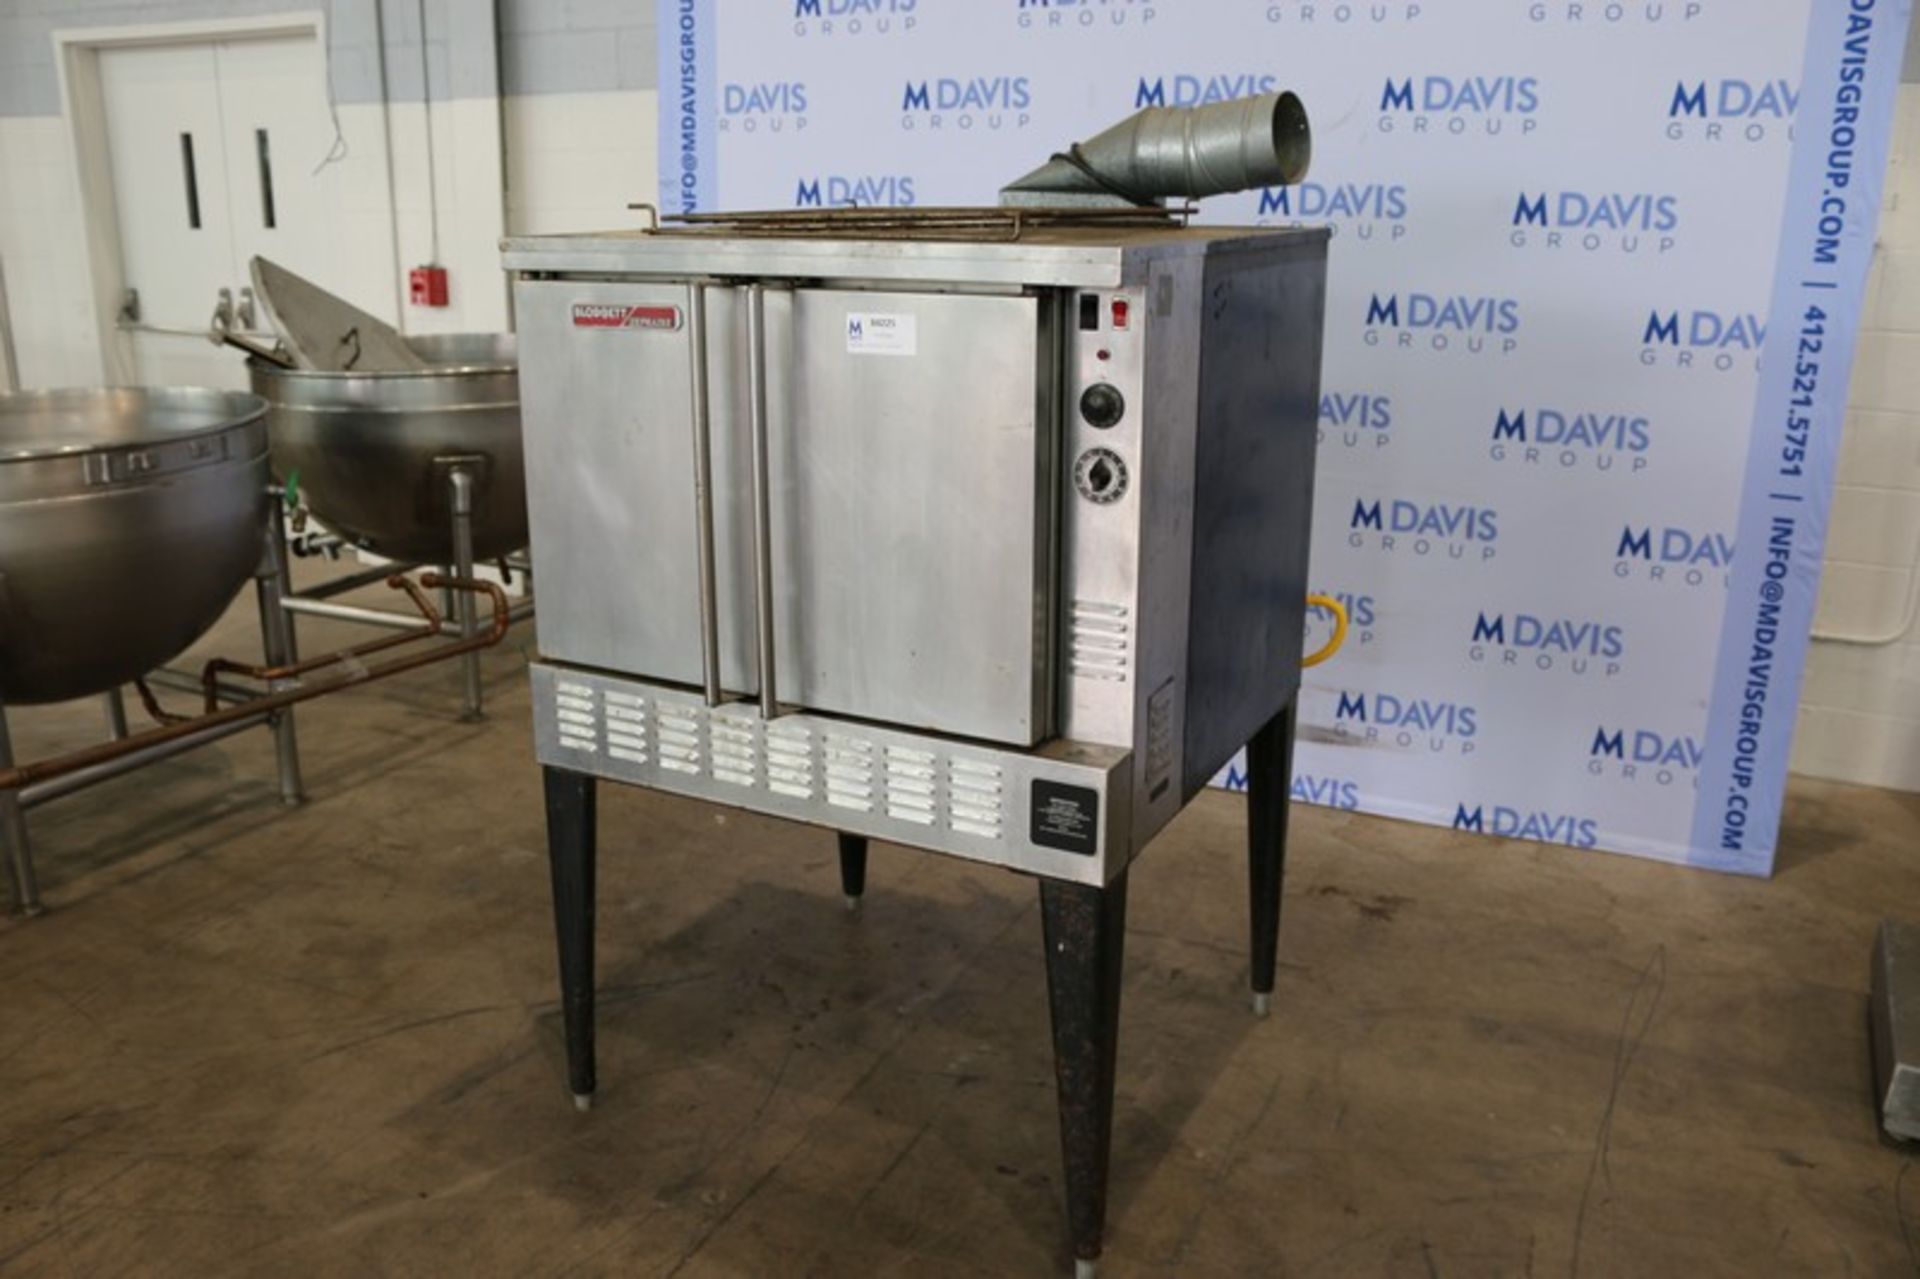 Blodgett Double Oven,On Legs, Overall Dims.: Aprox. 50" L x 38" W x 67" H (INV#84225) (Located @ the